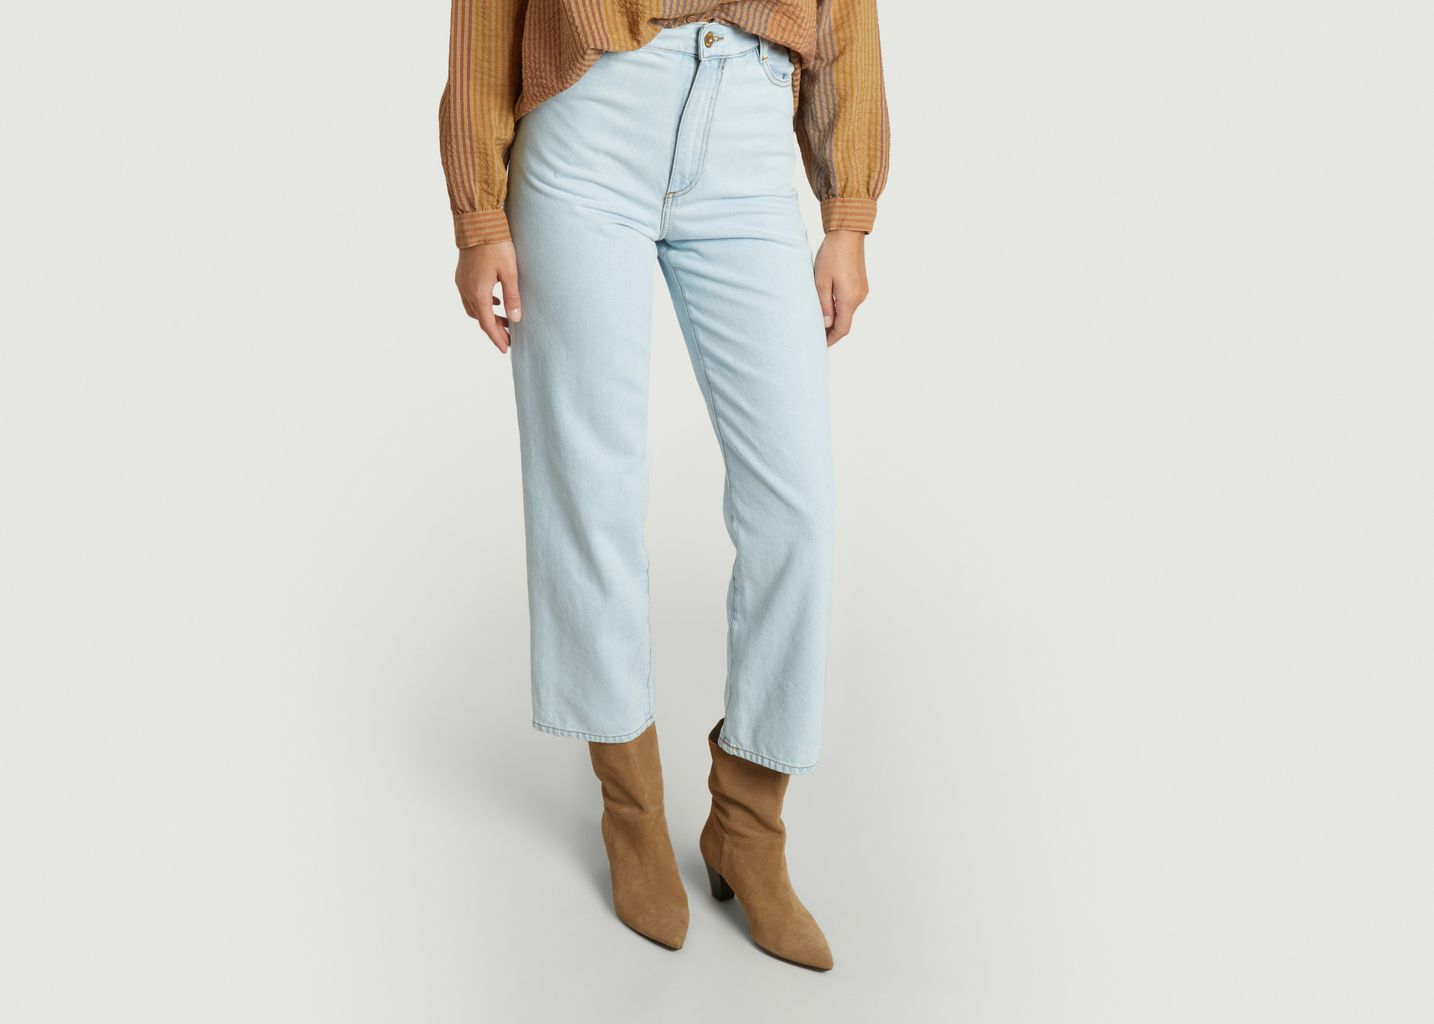 Bay Cruise jeans - Sessun